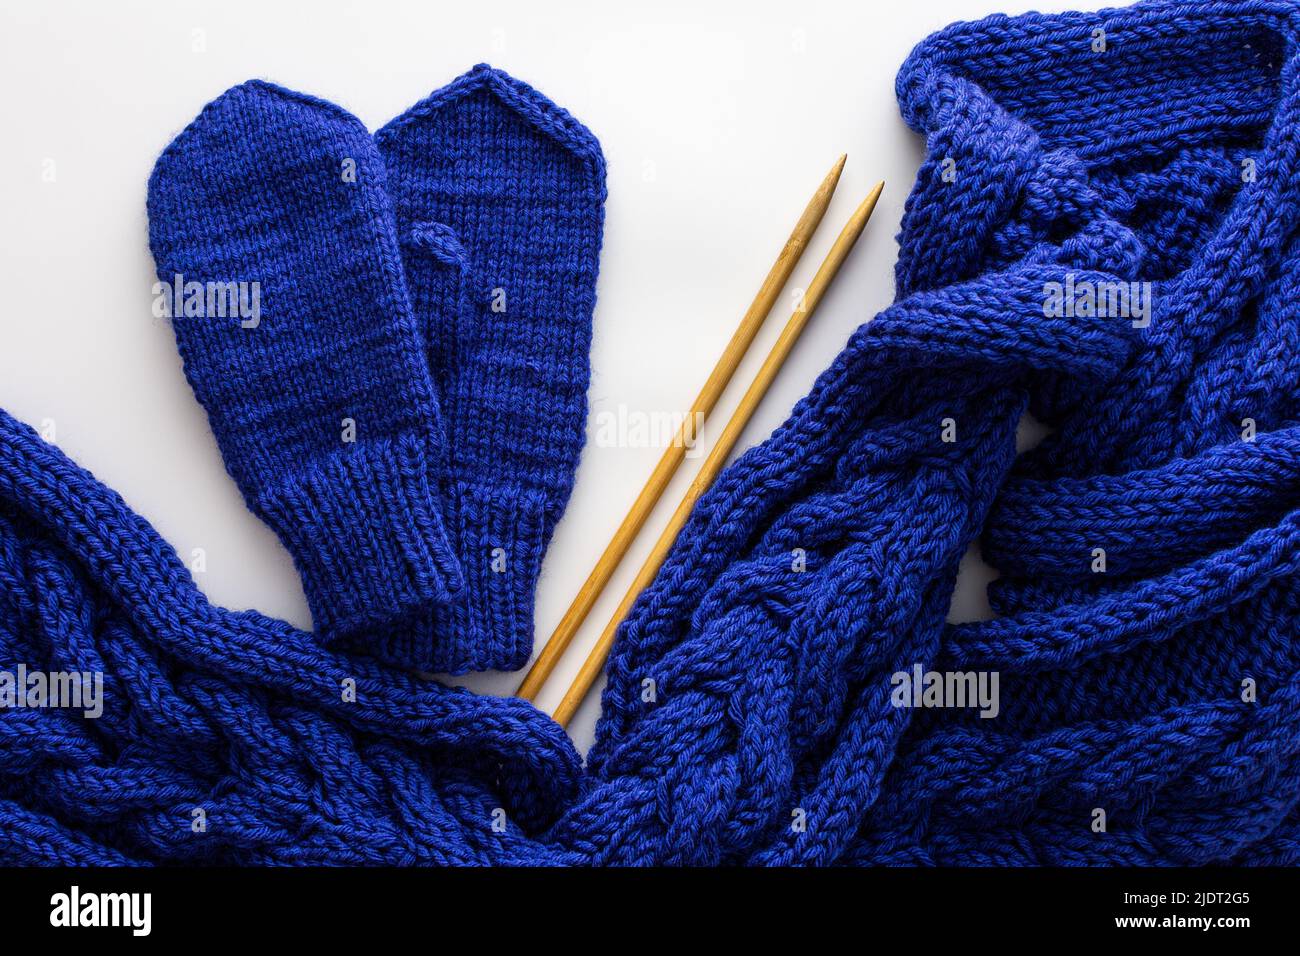 Blue knitted woolen scarf and mittens and knitting needles on a white background, homemade needlework concept, top view Stock Photo